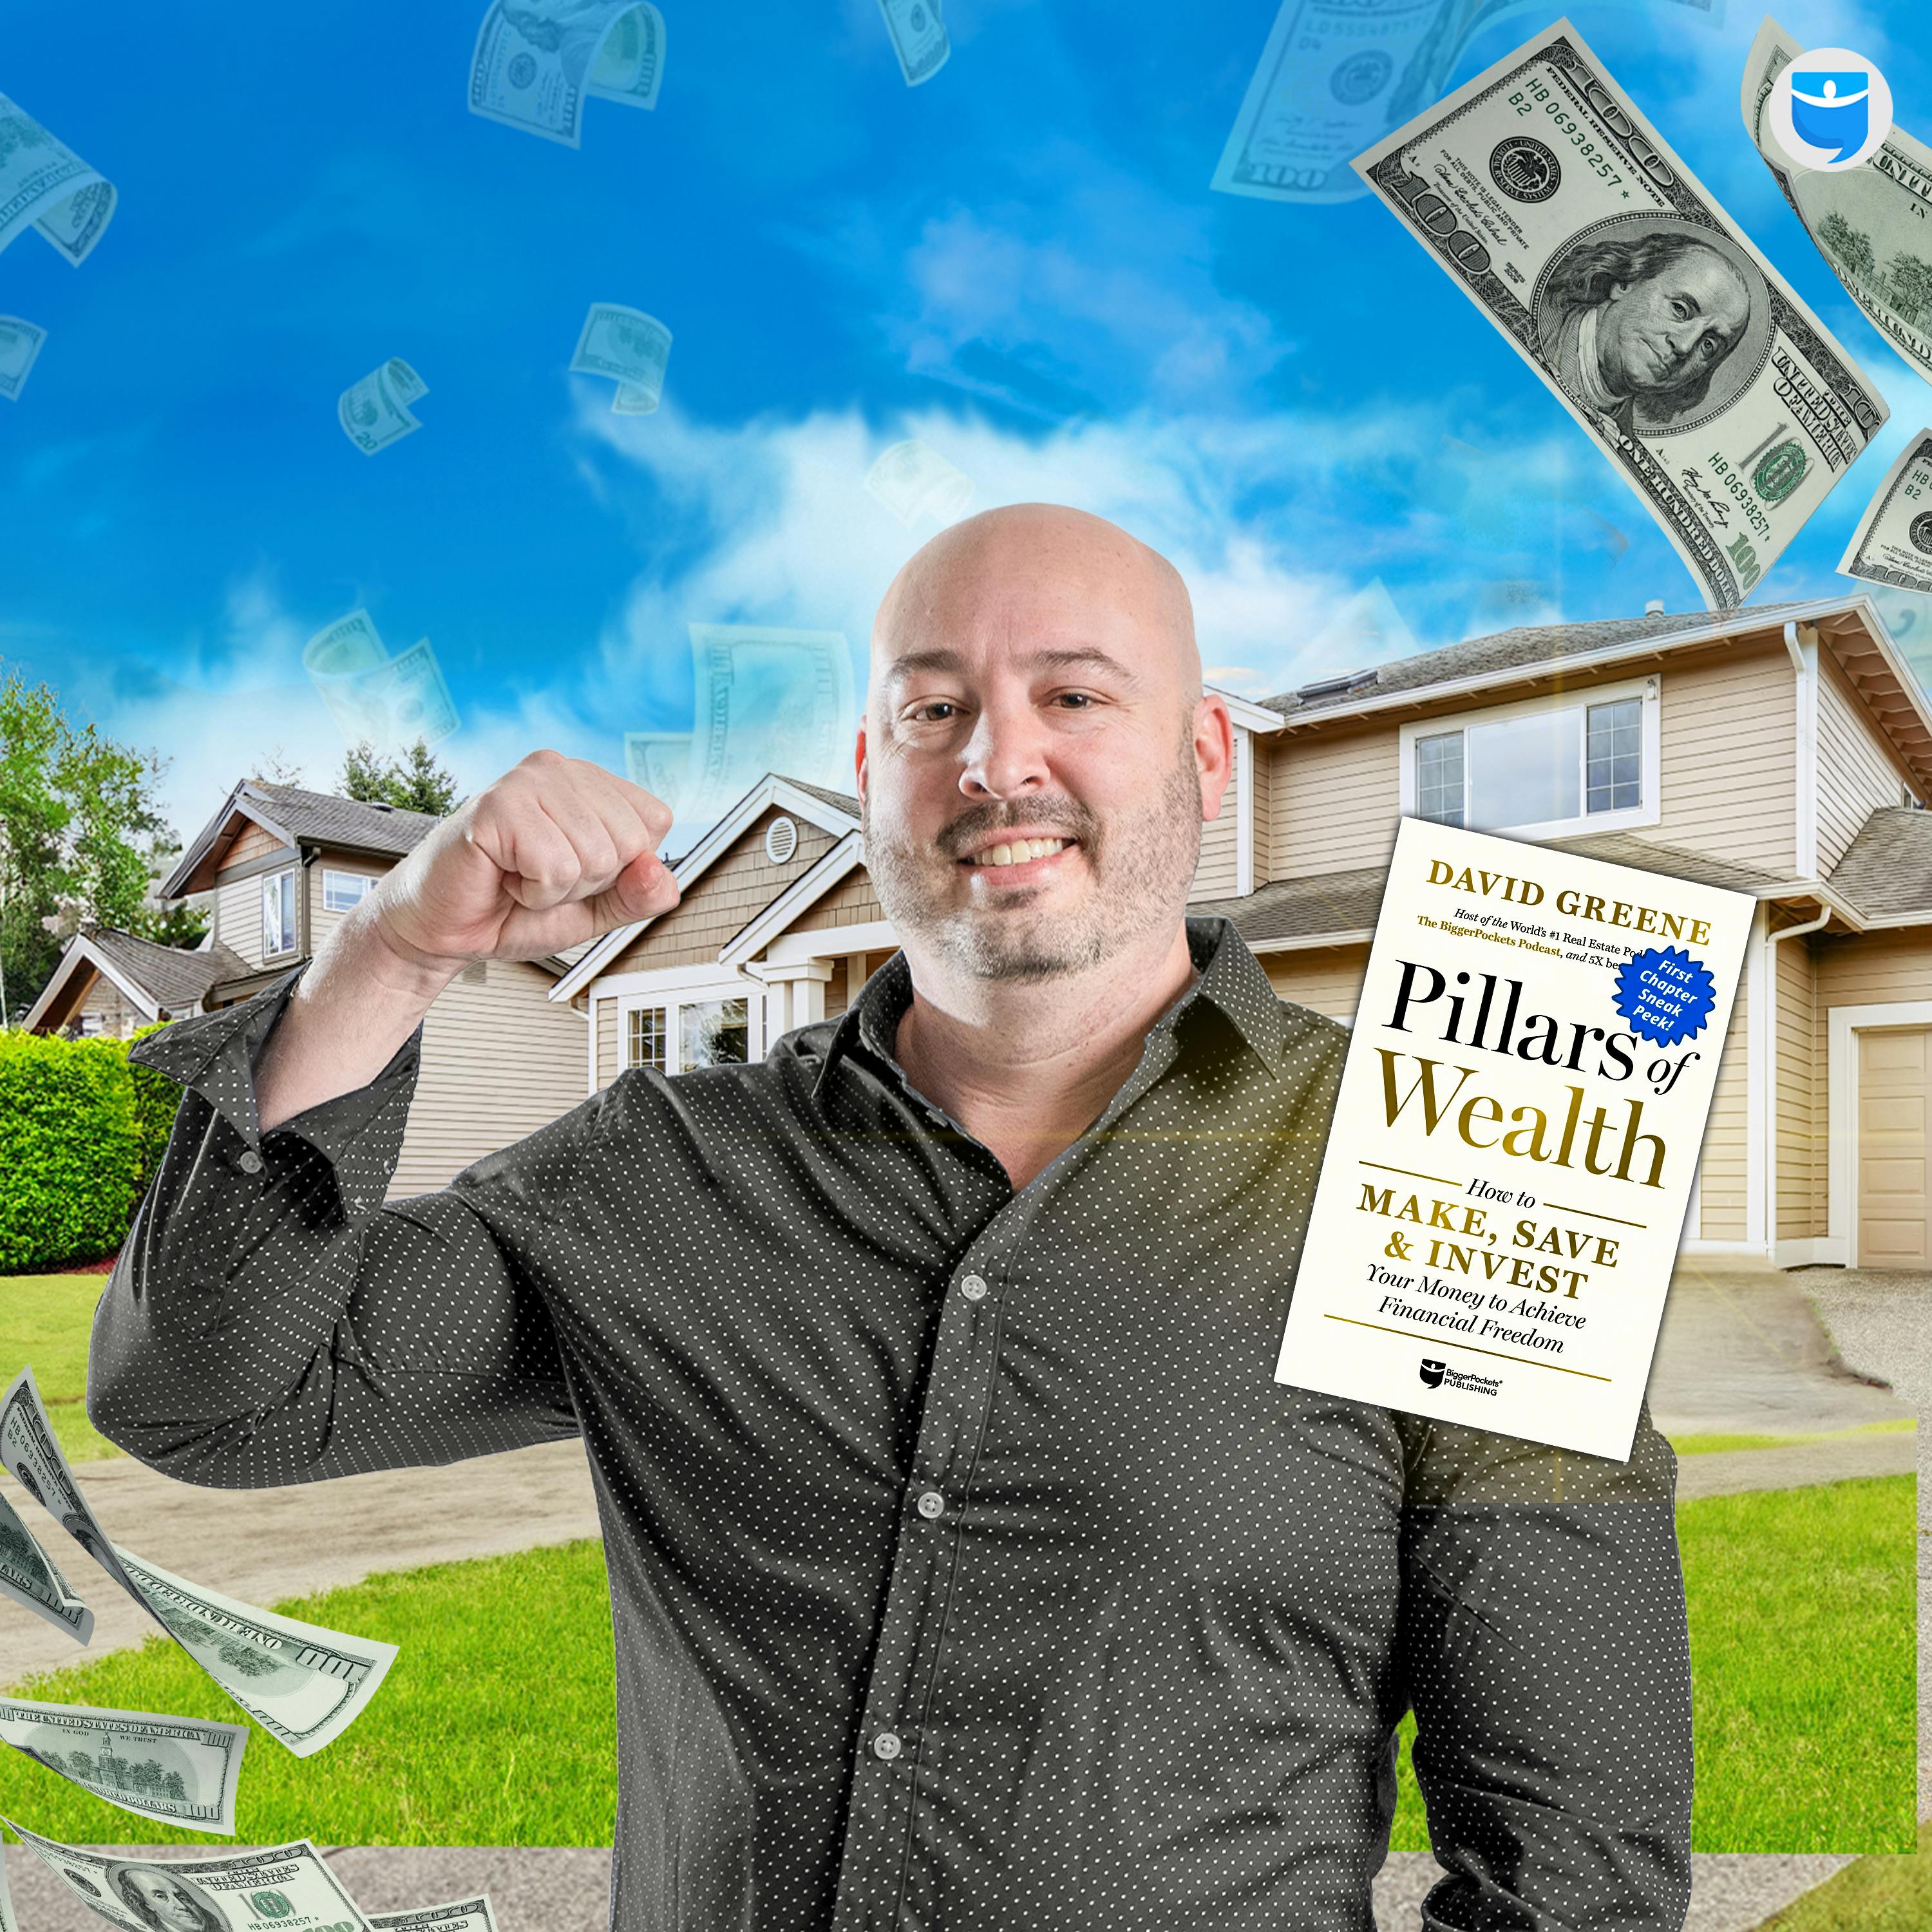 328: David Greene on The 3 "Pillars" of Wealth That Lead to Financial Freedom